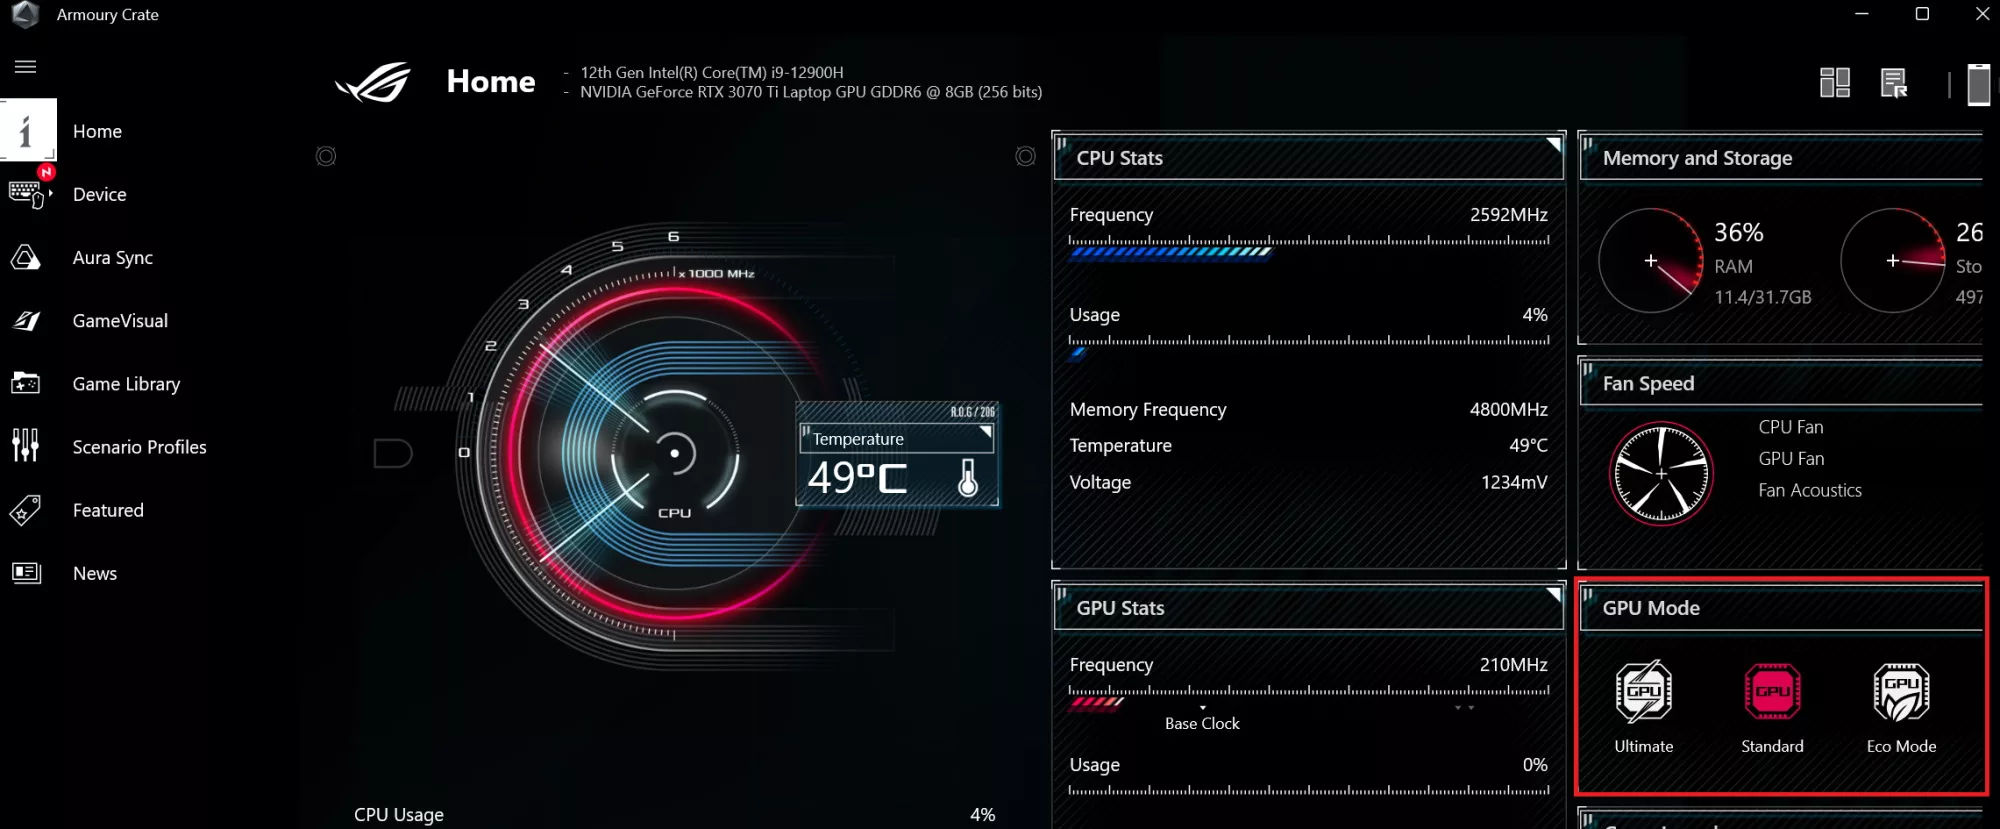 Main menu of Armoury Crate, with a highlight on the GPU mode selection.